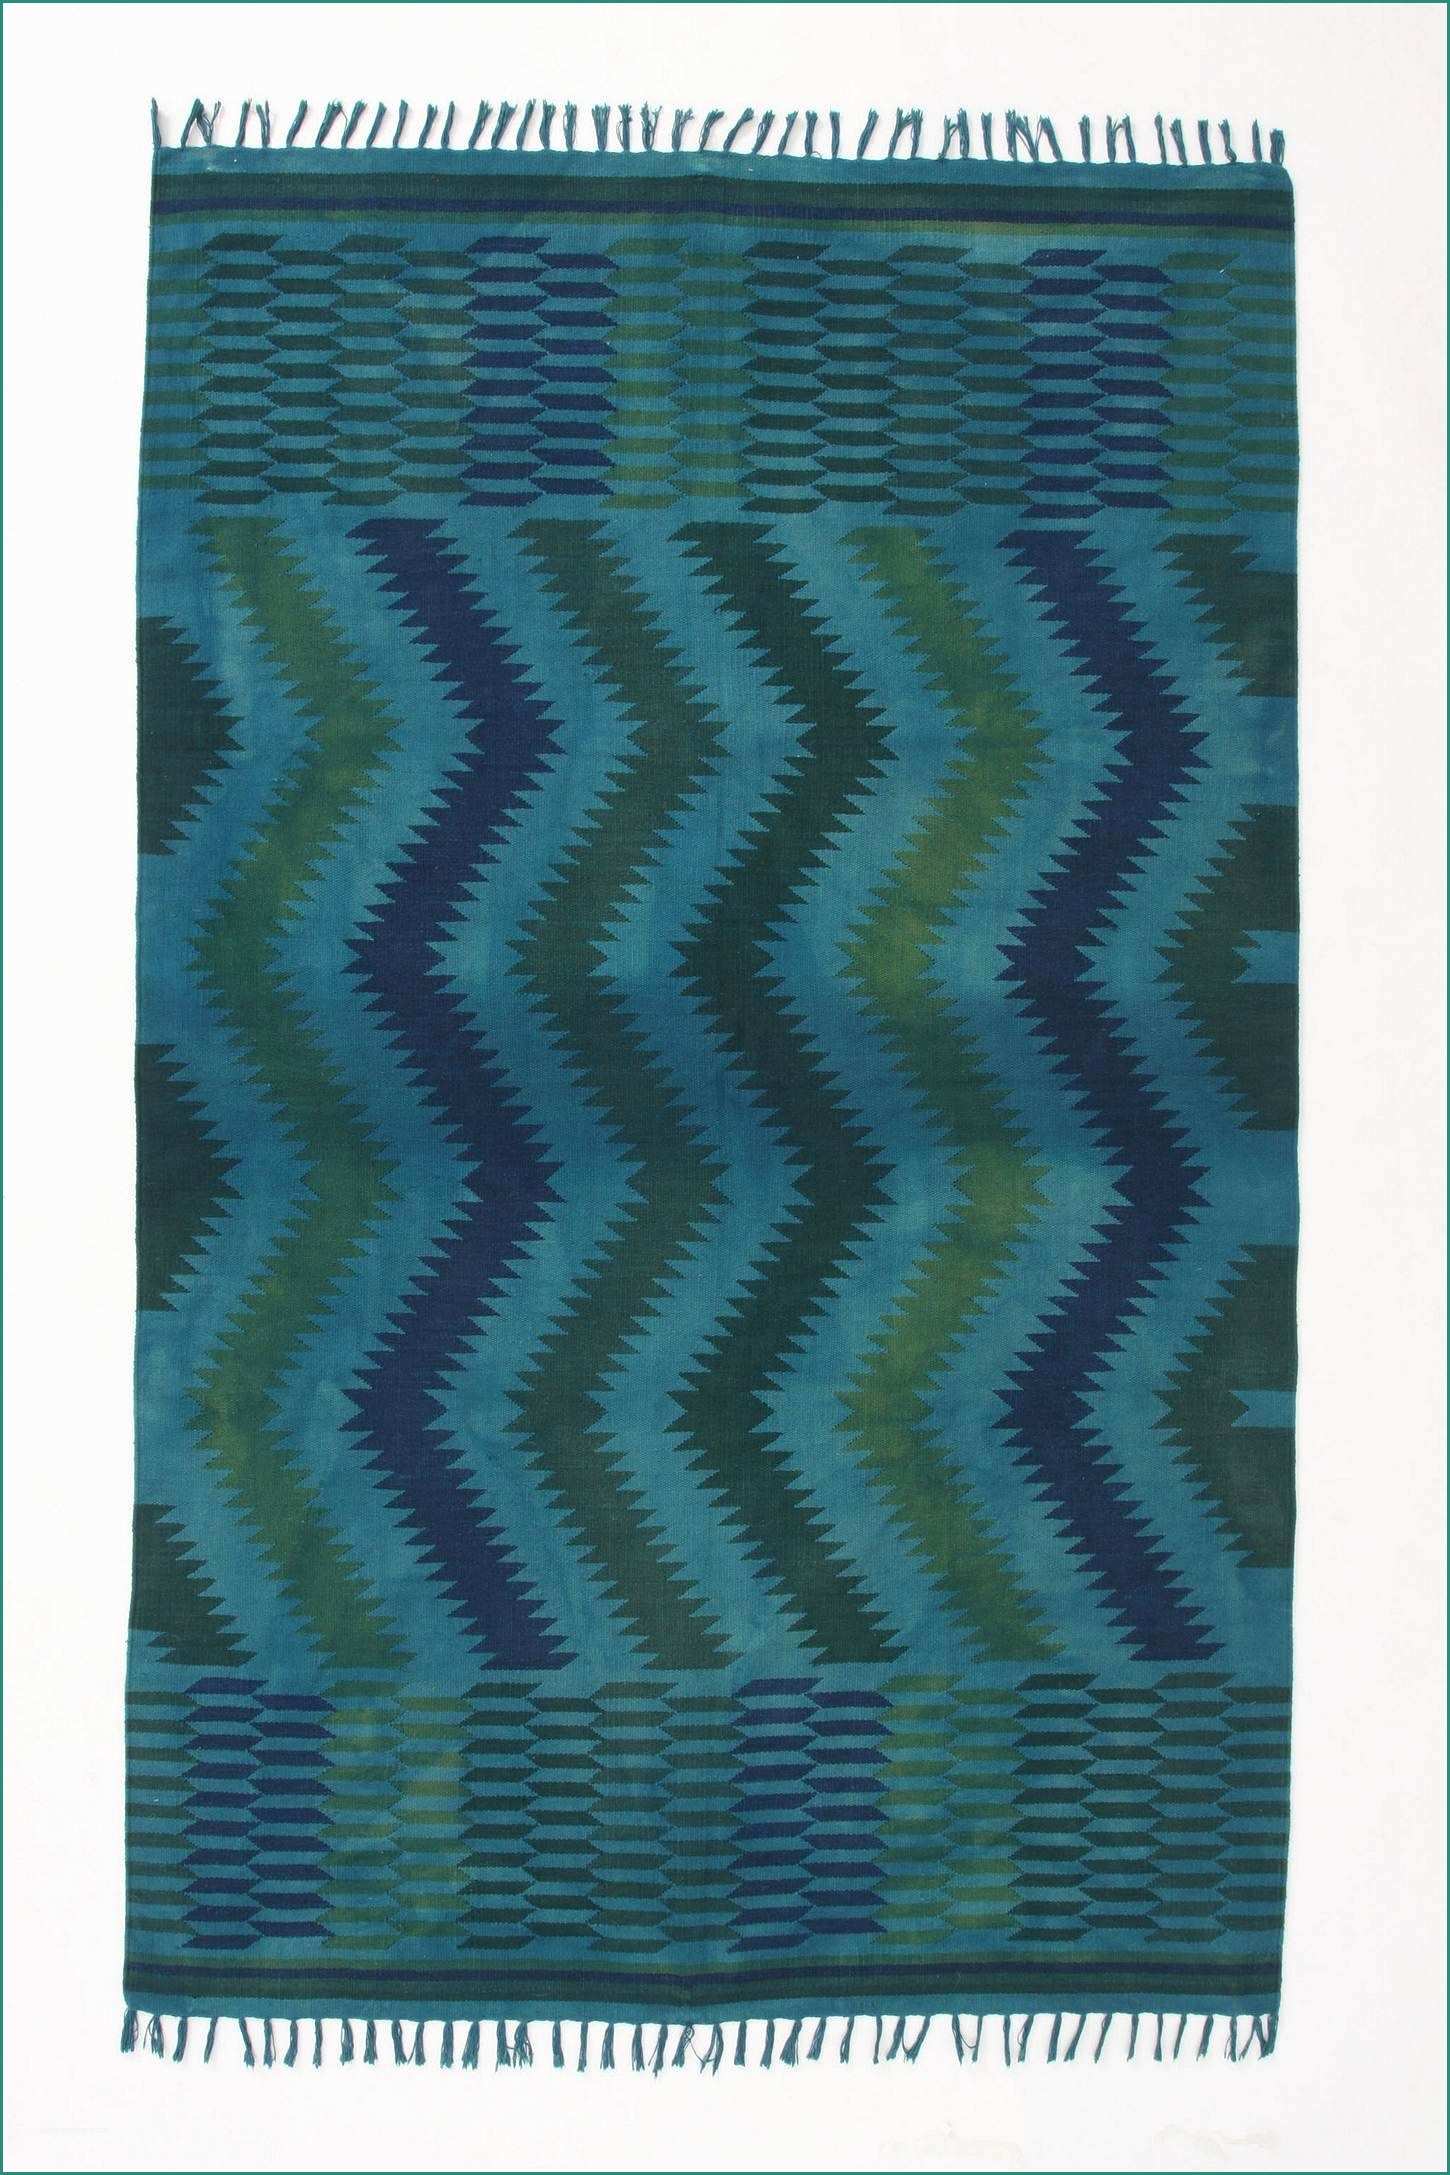 Tappeto Pelo Corto E Saturated Zigzags Rug 4x6 $298 Green and Teal